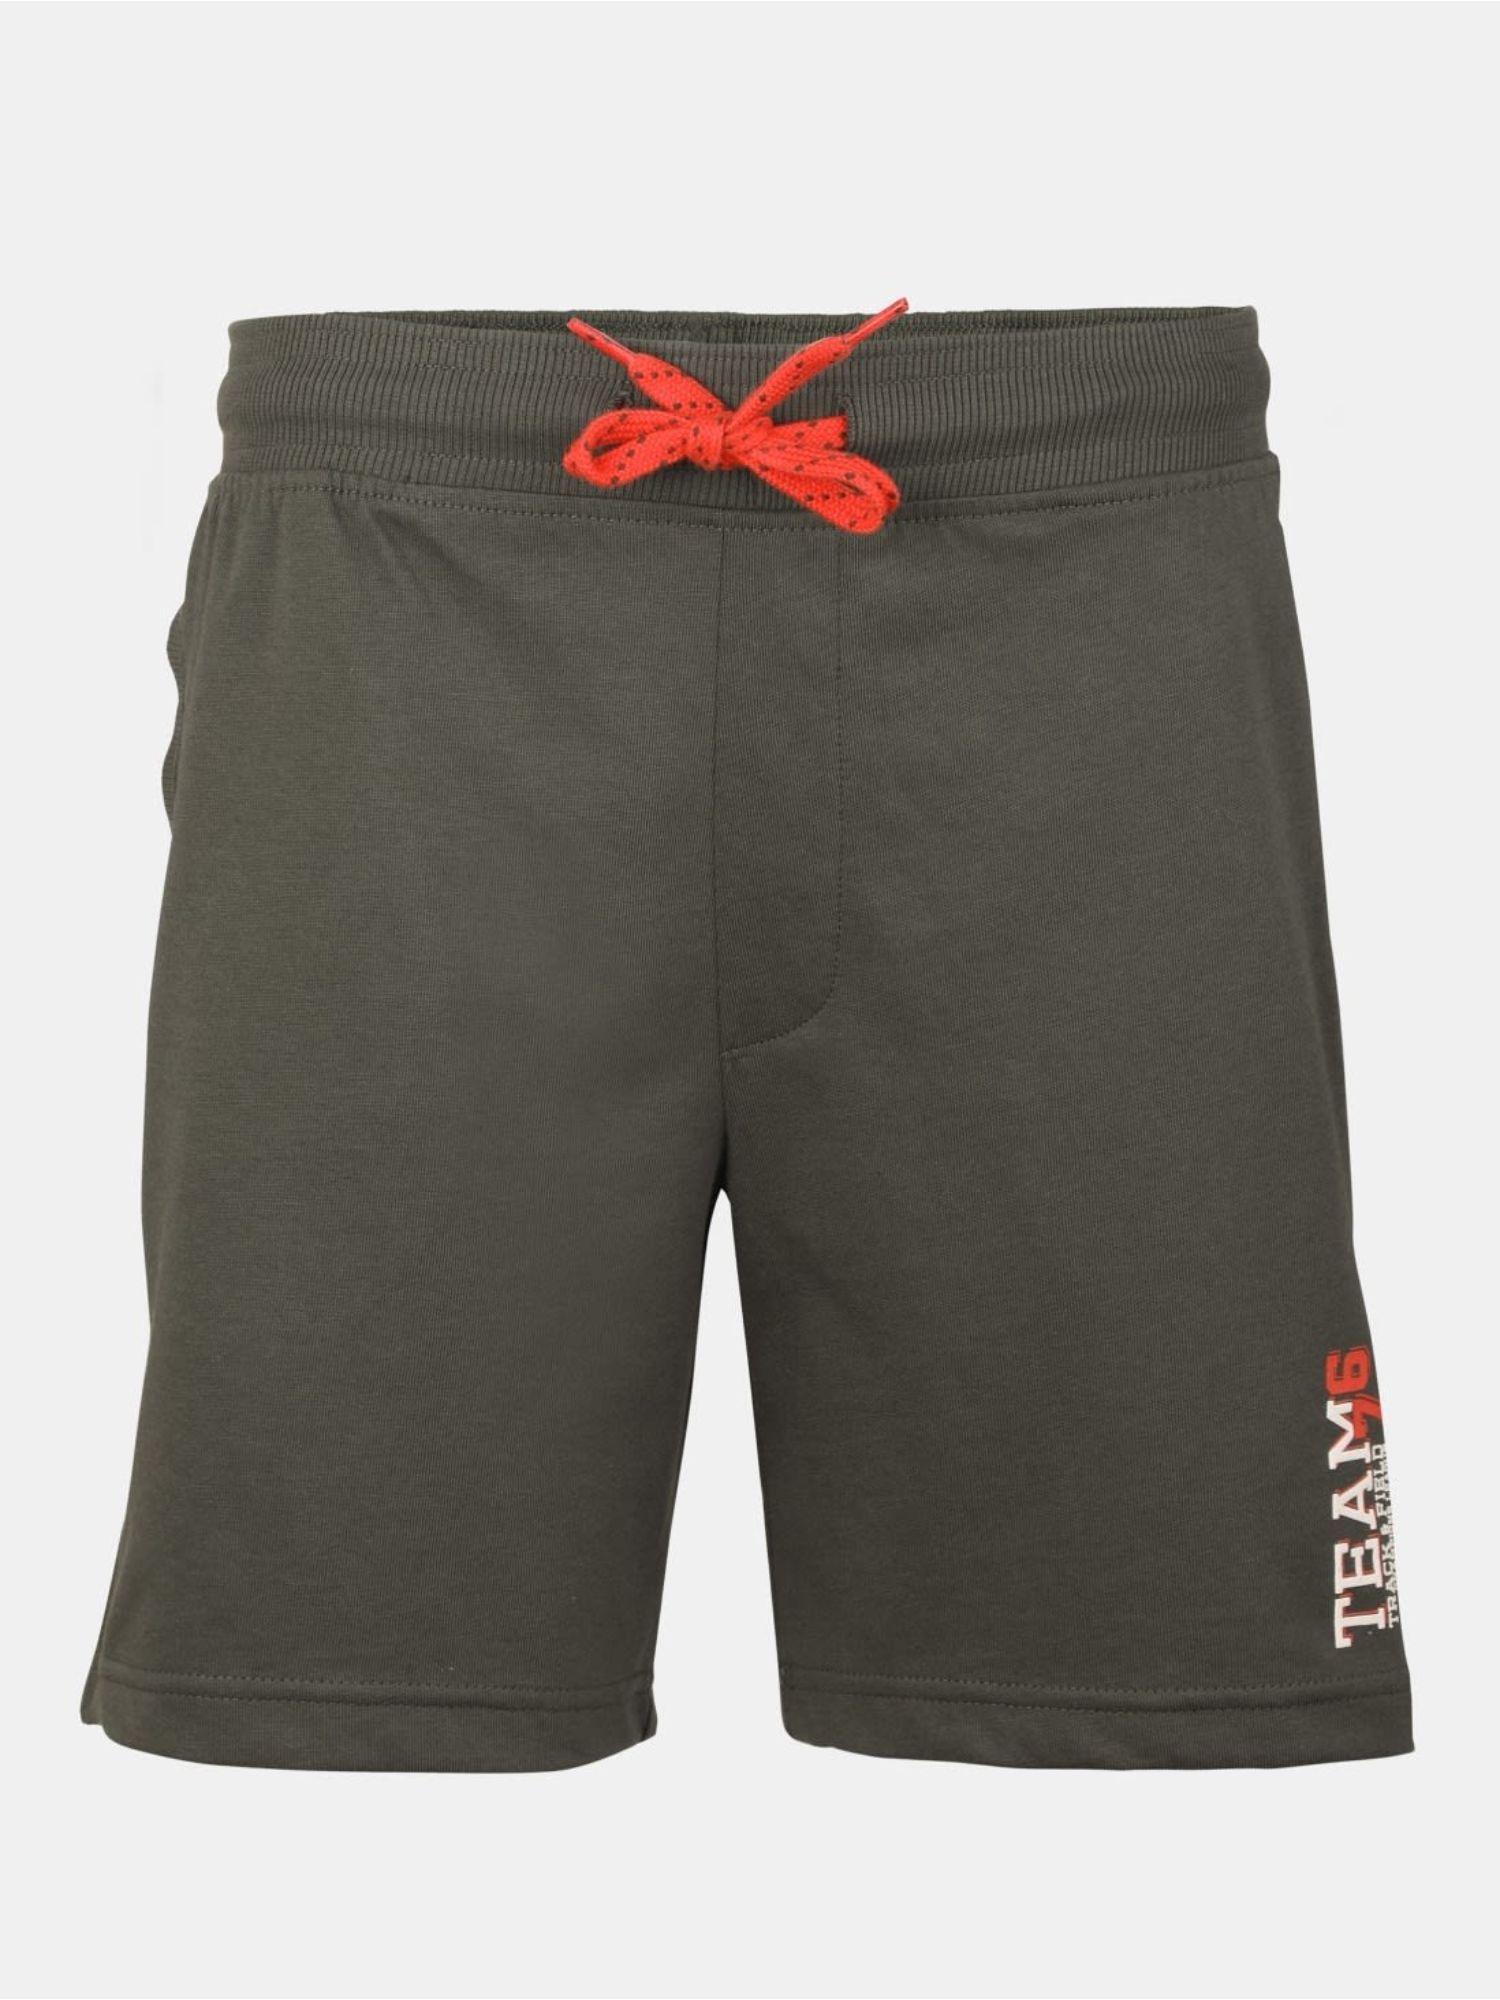 deep olive boys shorts - style number - (ab12)